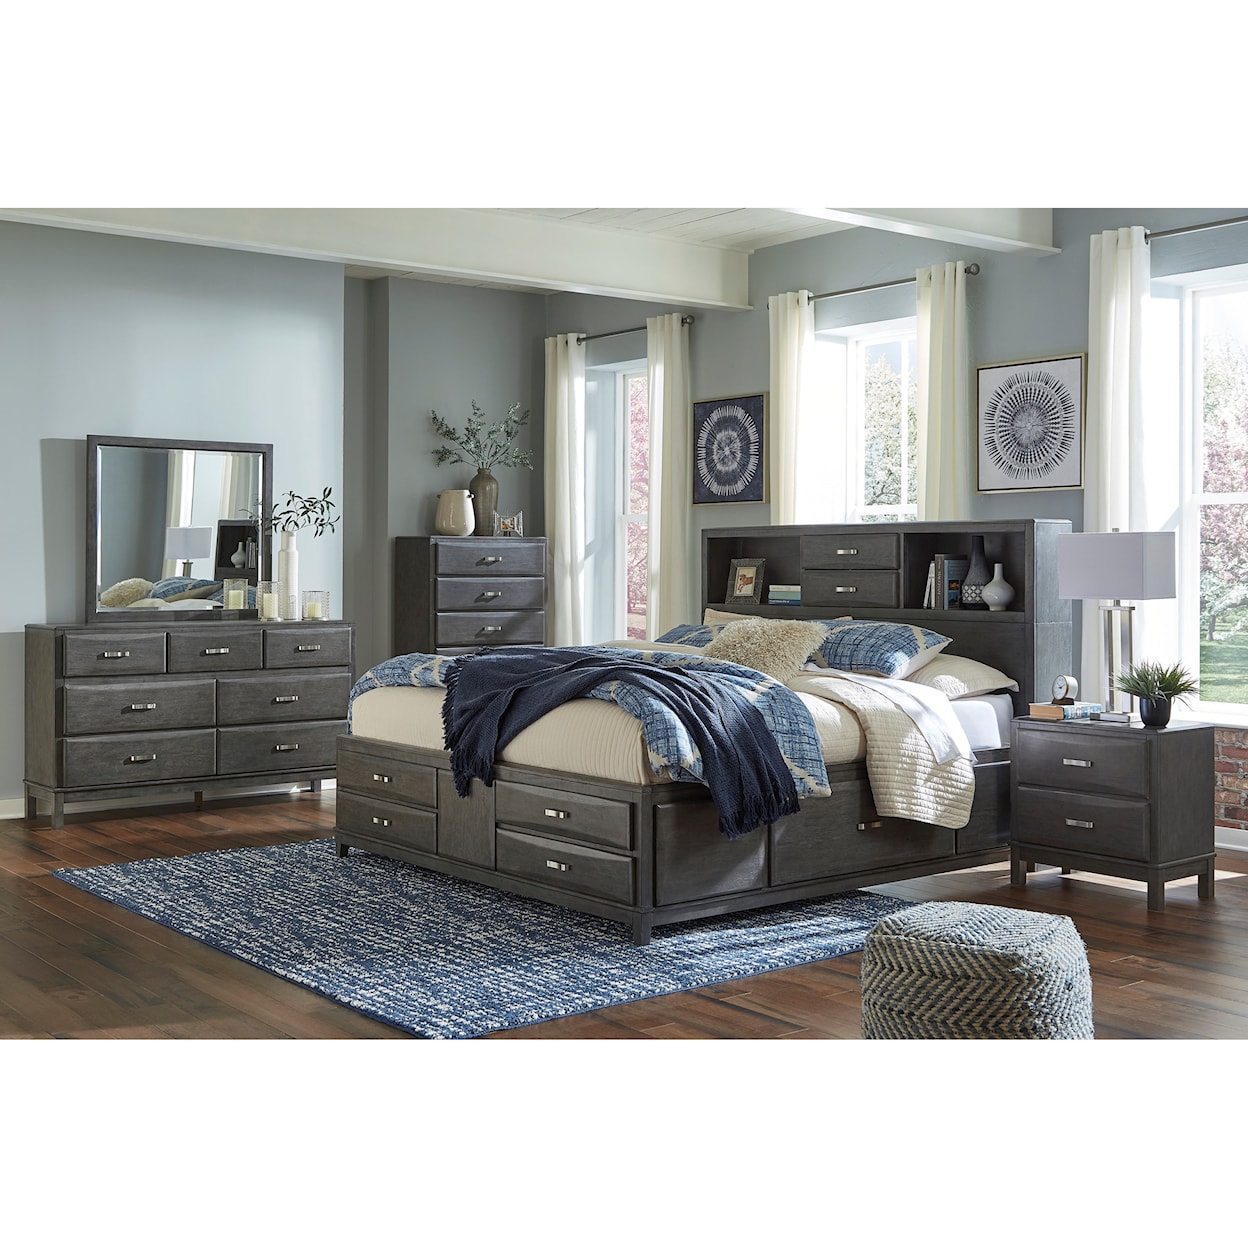 Signature Design by Ashley Caitbrook California King Bedroom Group